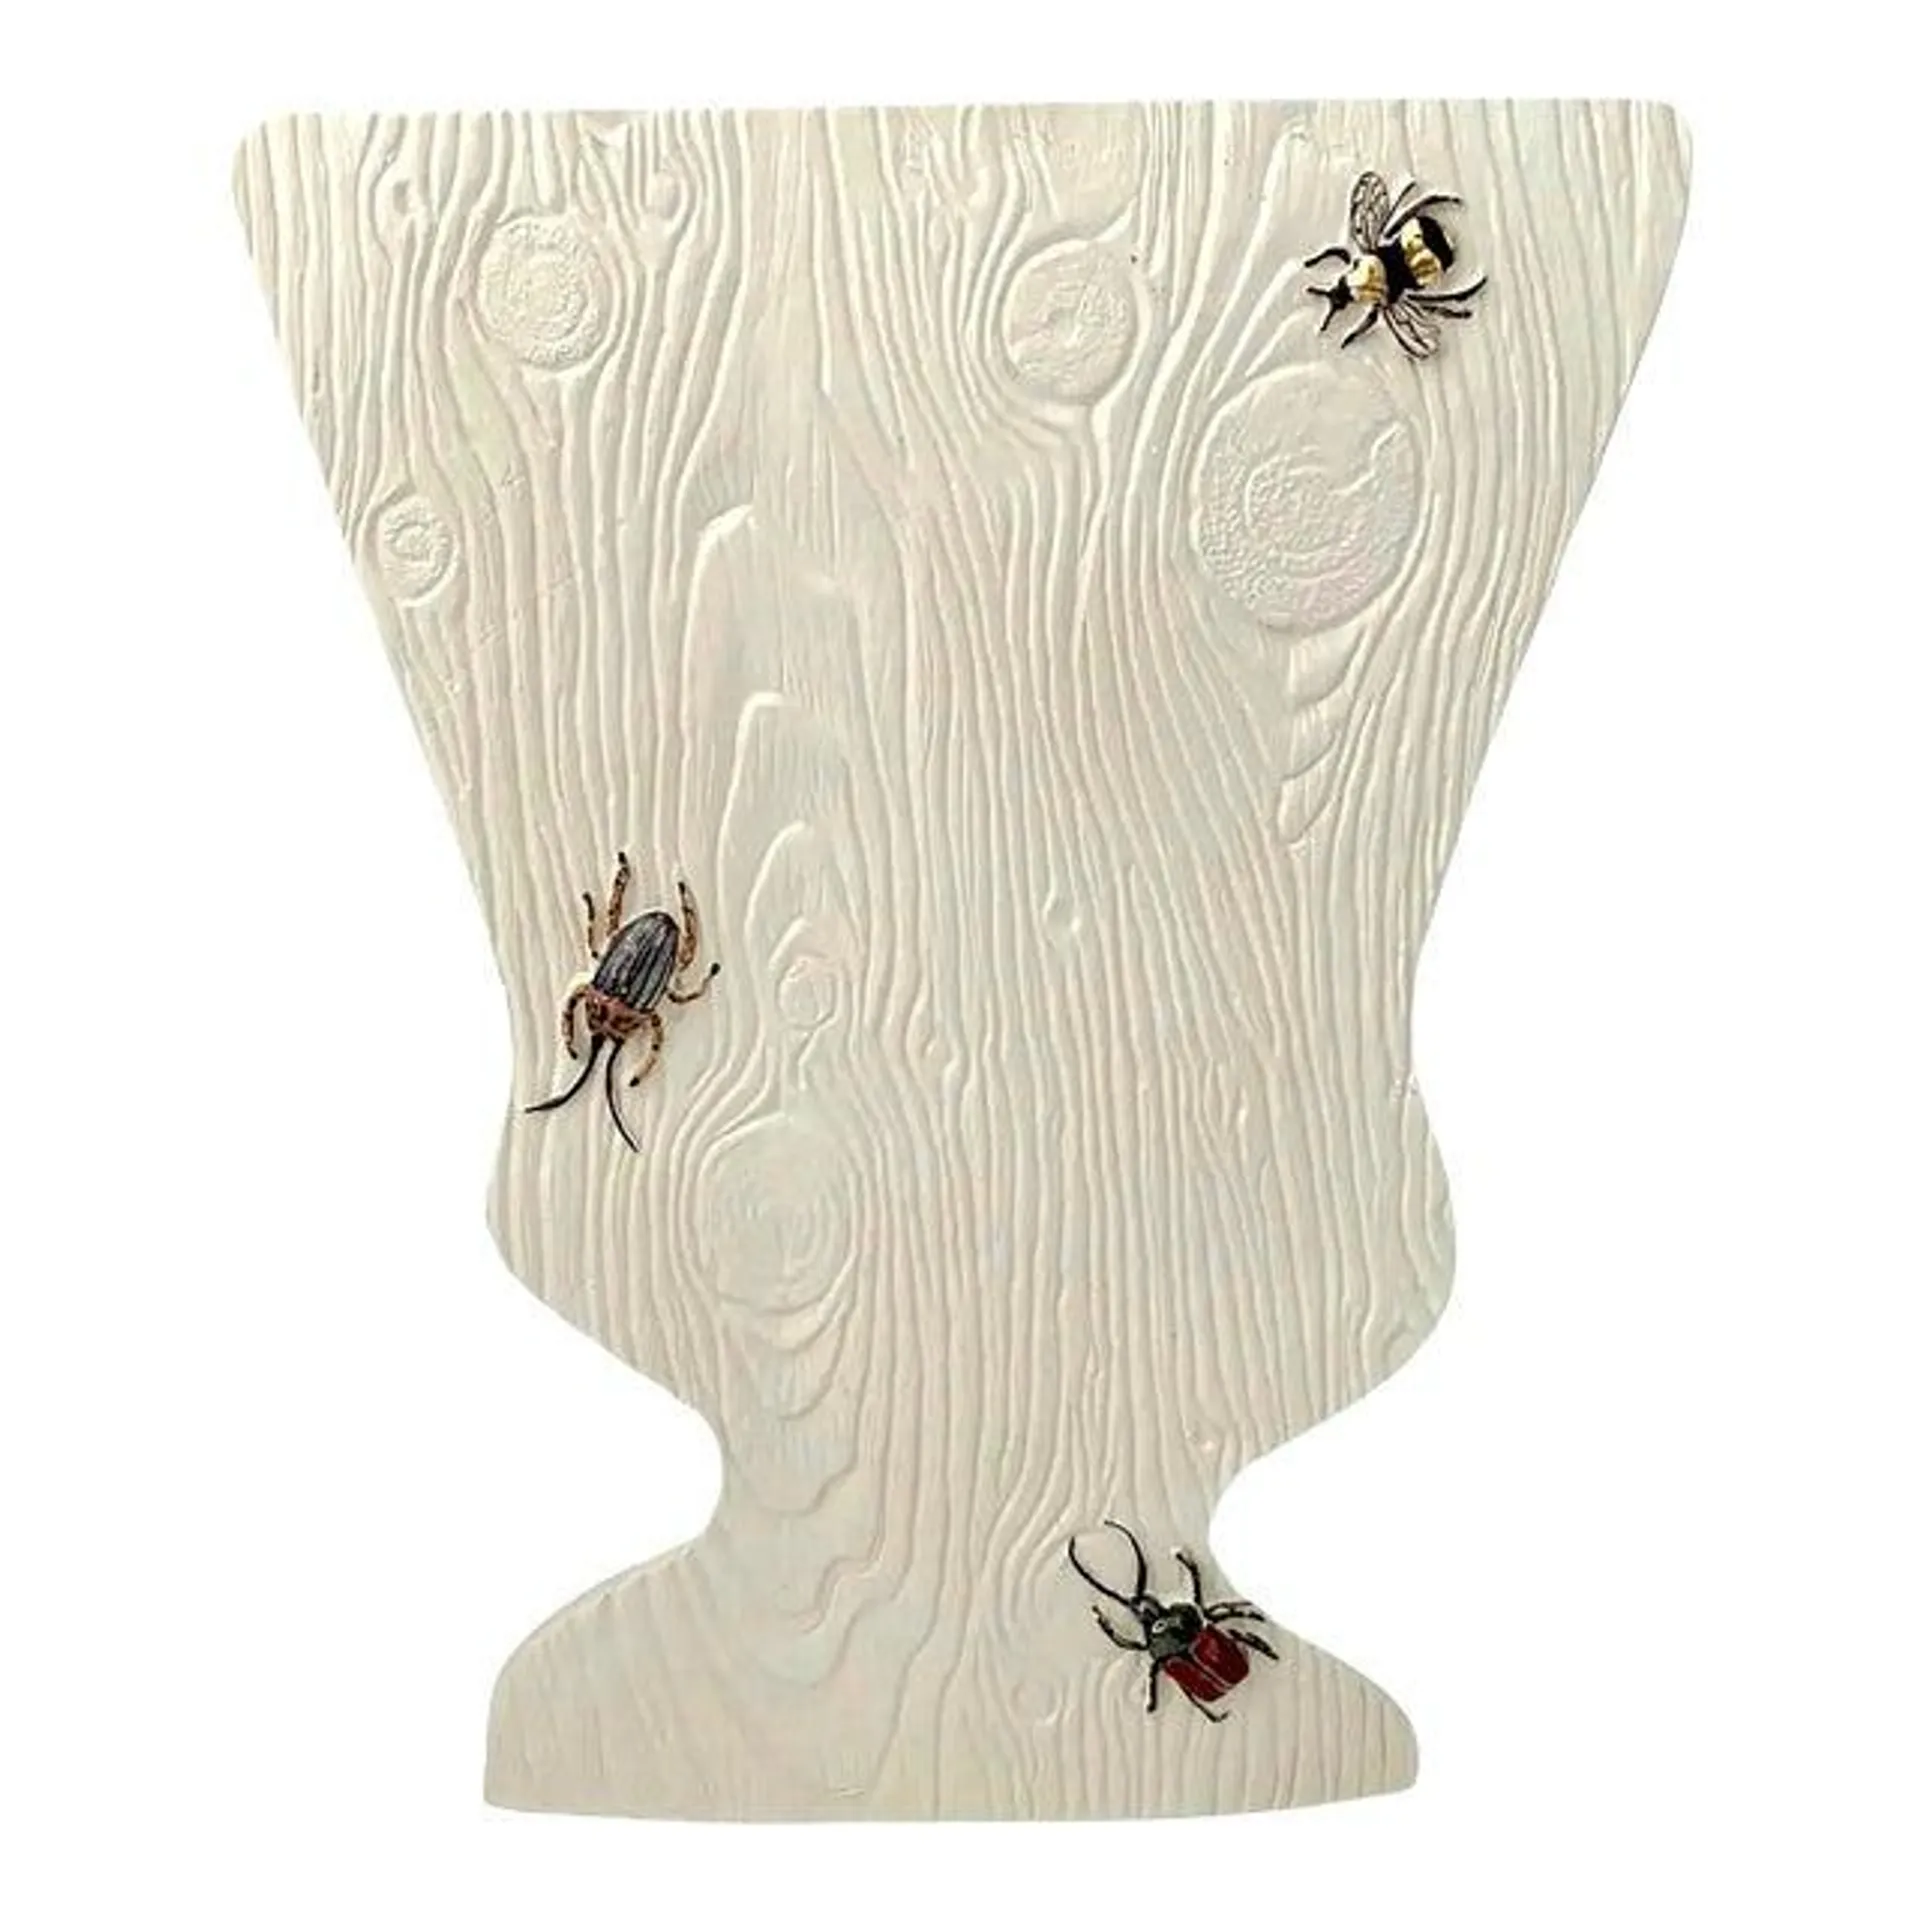 Liz Marsh Faux Bois Urn Shaped Silhouette Vase With Bugs